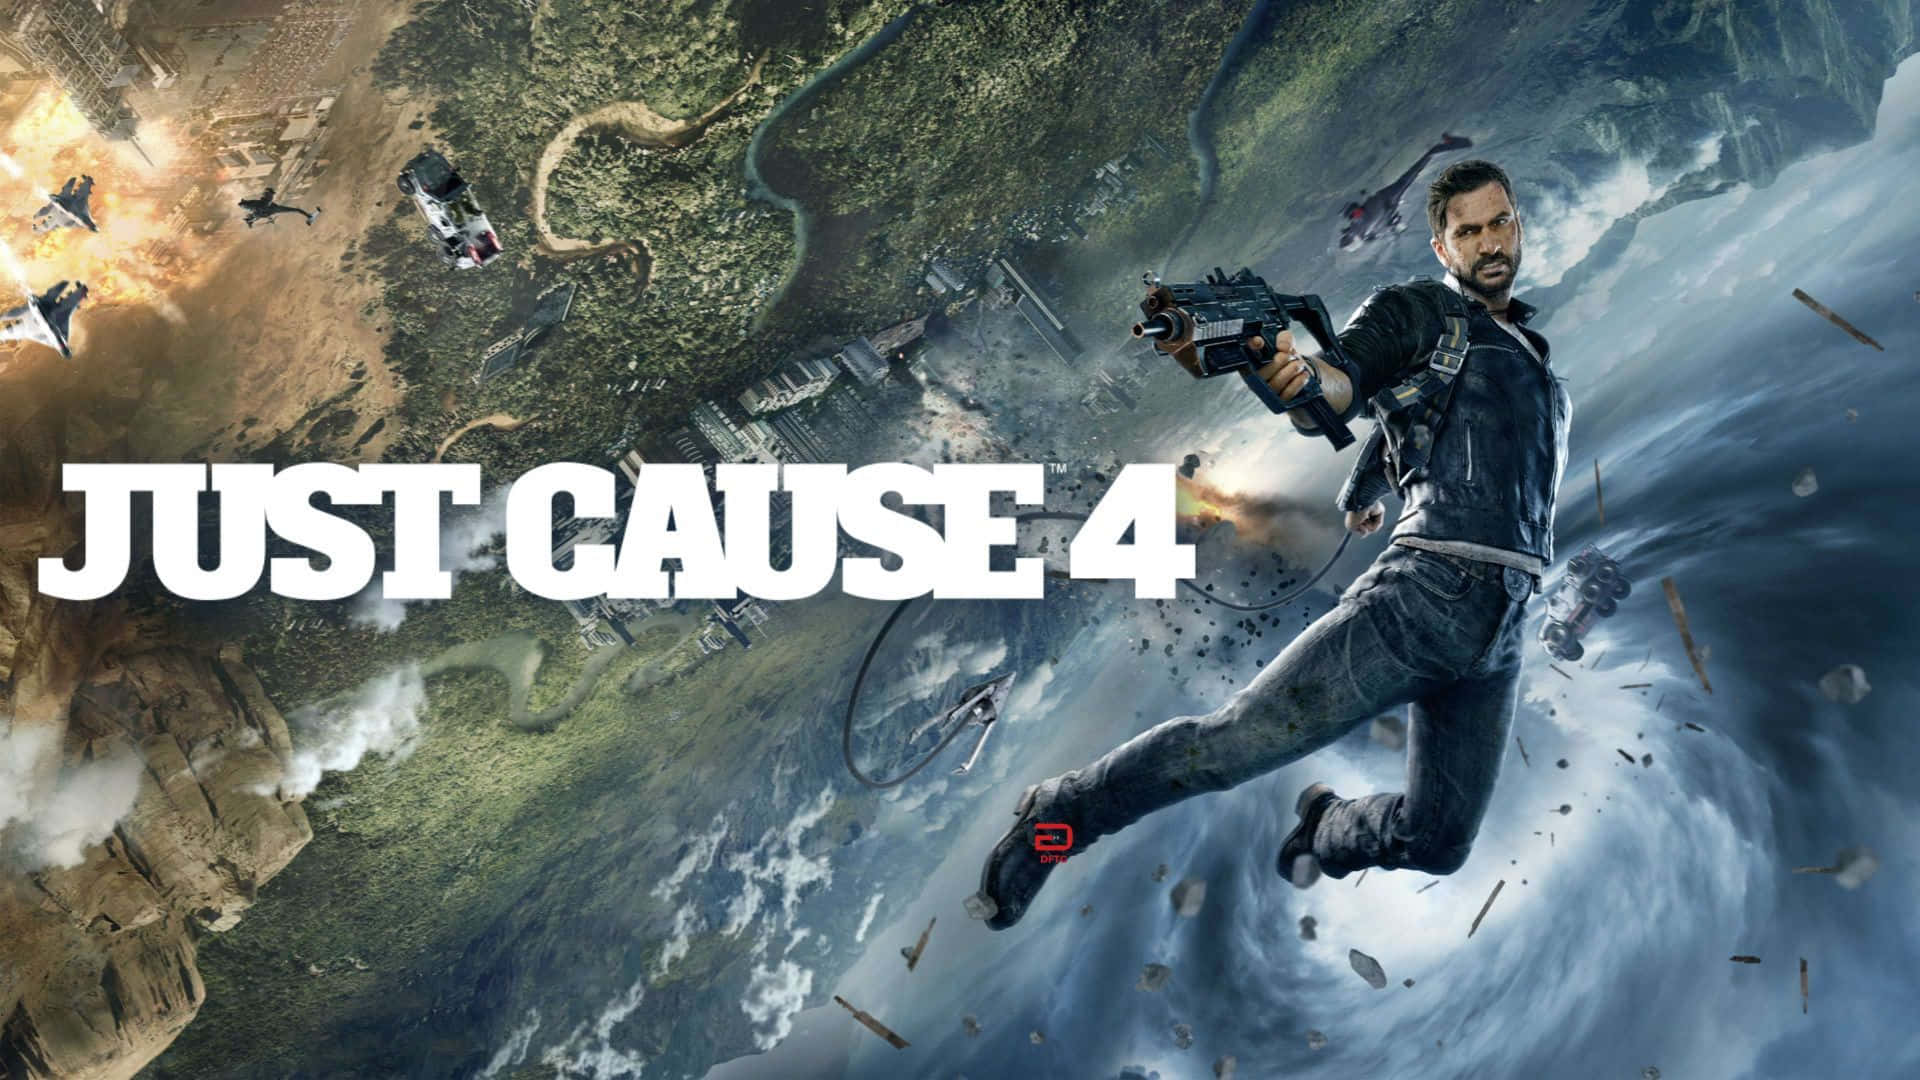 10 Just Cause 4 HD Wallpapers and Backgrounds